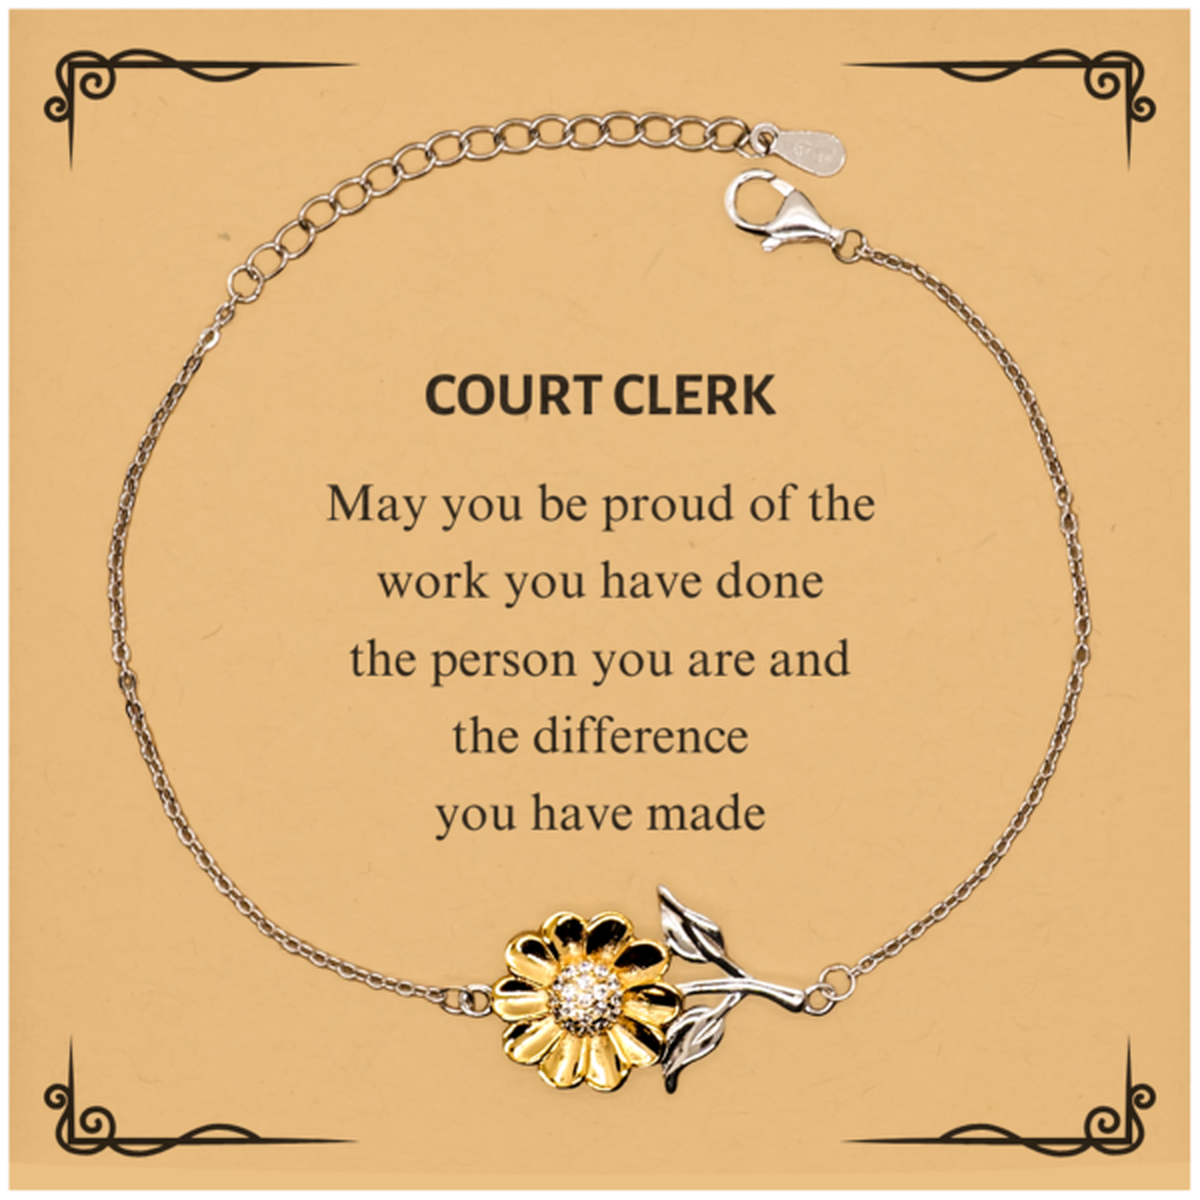 Court Clerk May you be proud of the work you have done, Retirement Court Clerk Sunflower Bracelet for Colleague Appreciation Gifts Amazing for Court Clerk